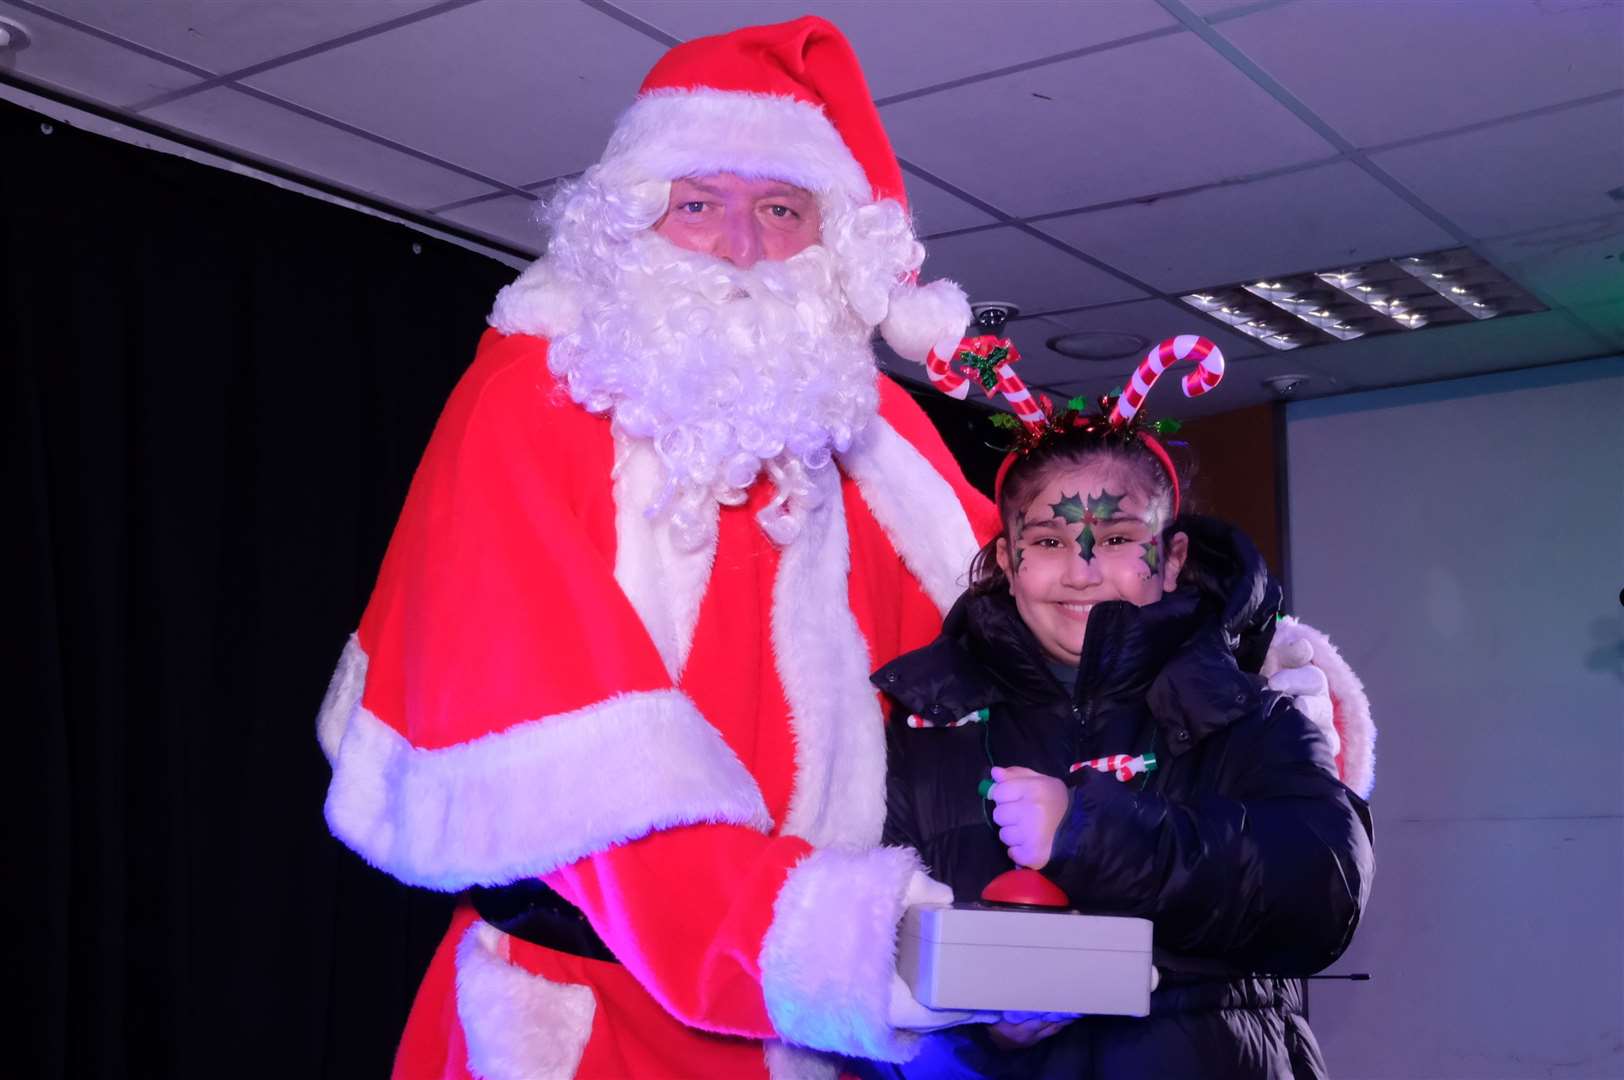 Lily Saleh, pictured with Santa, won the opportunity to put on the lights.